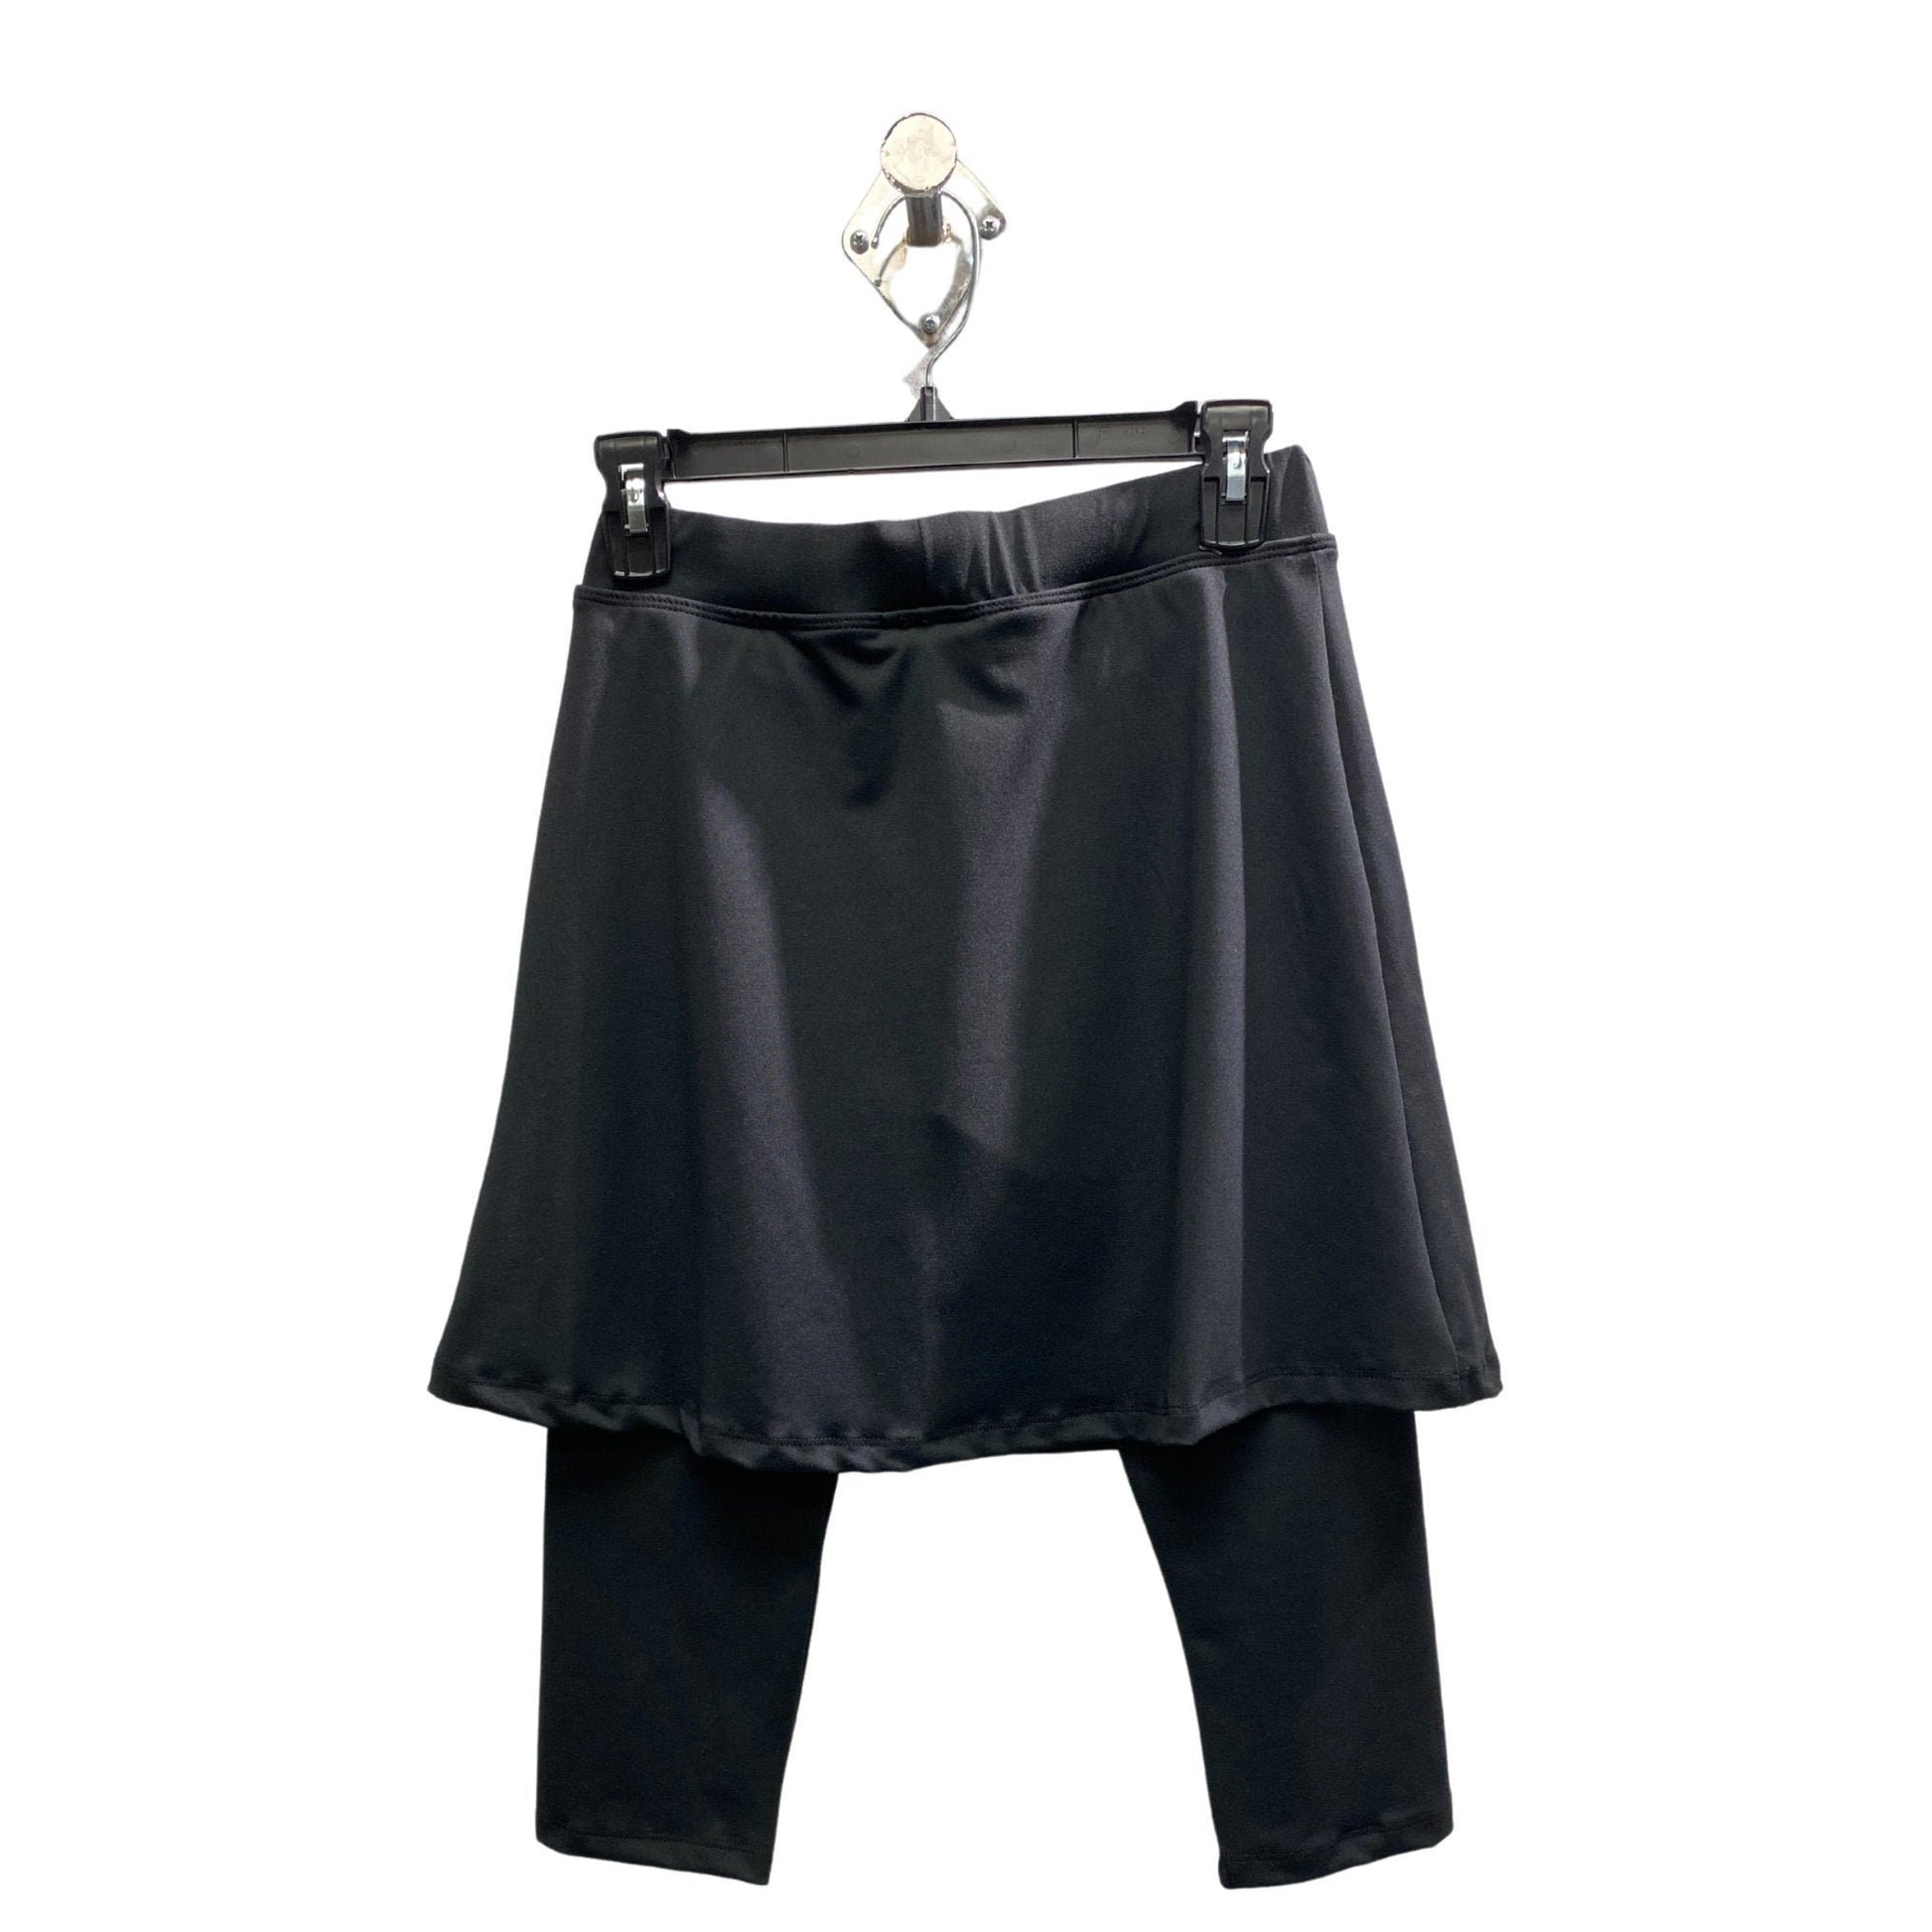 Girls Pants with Attached Skirt, Mini Flared Skirt with Leggings